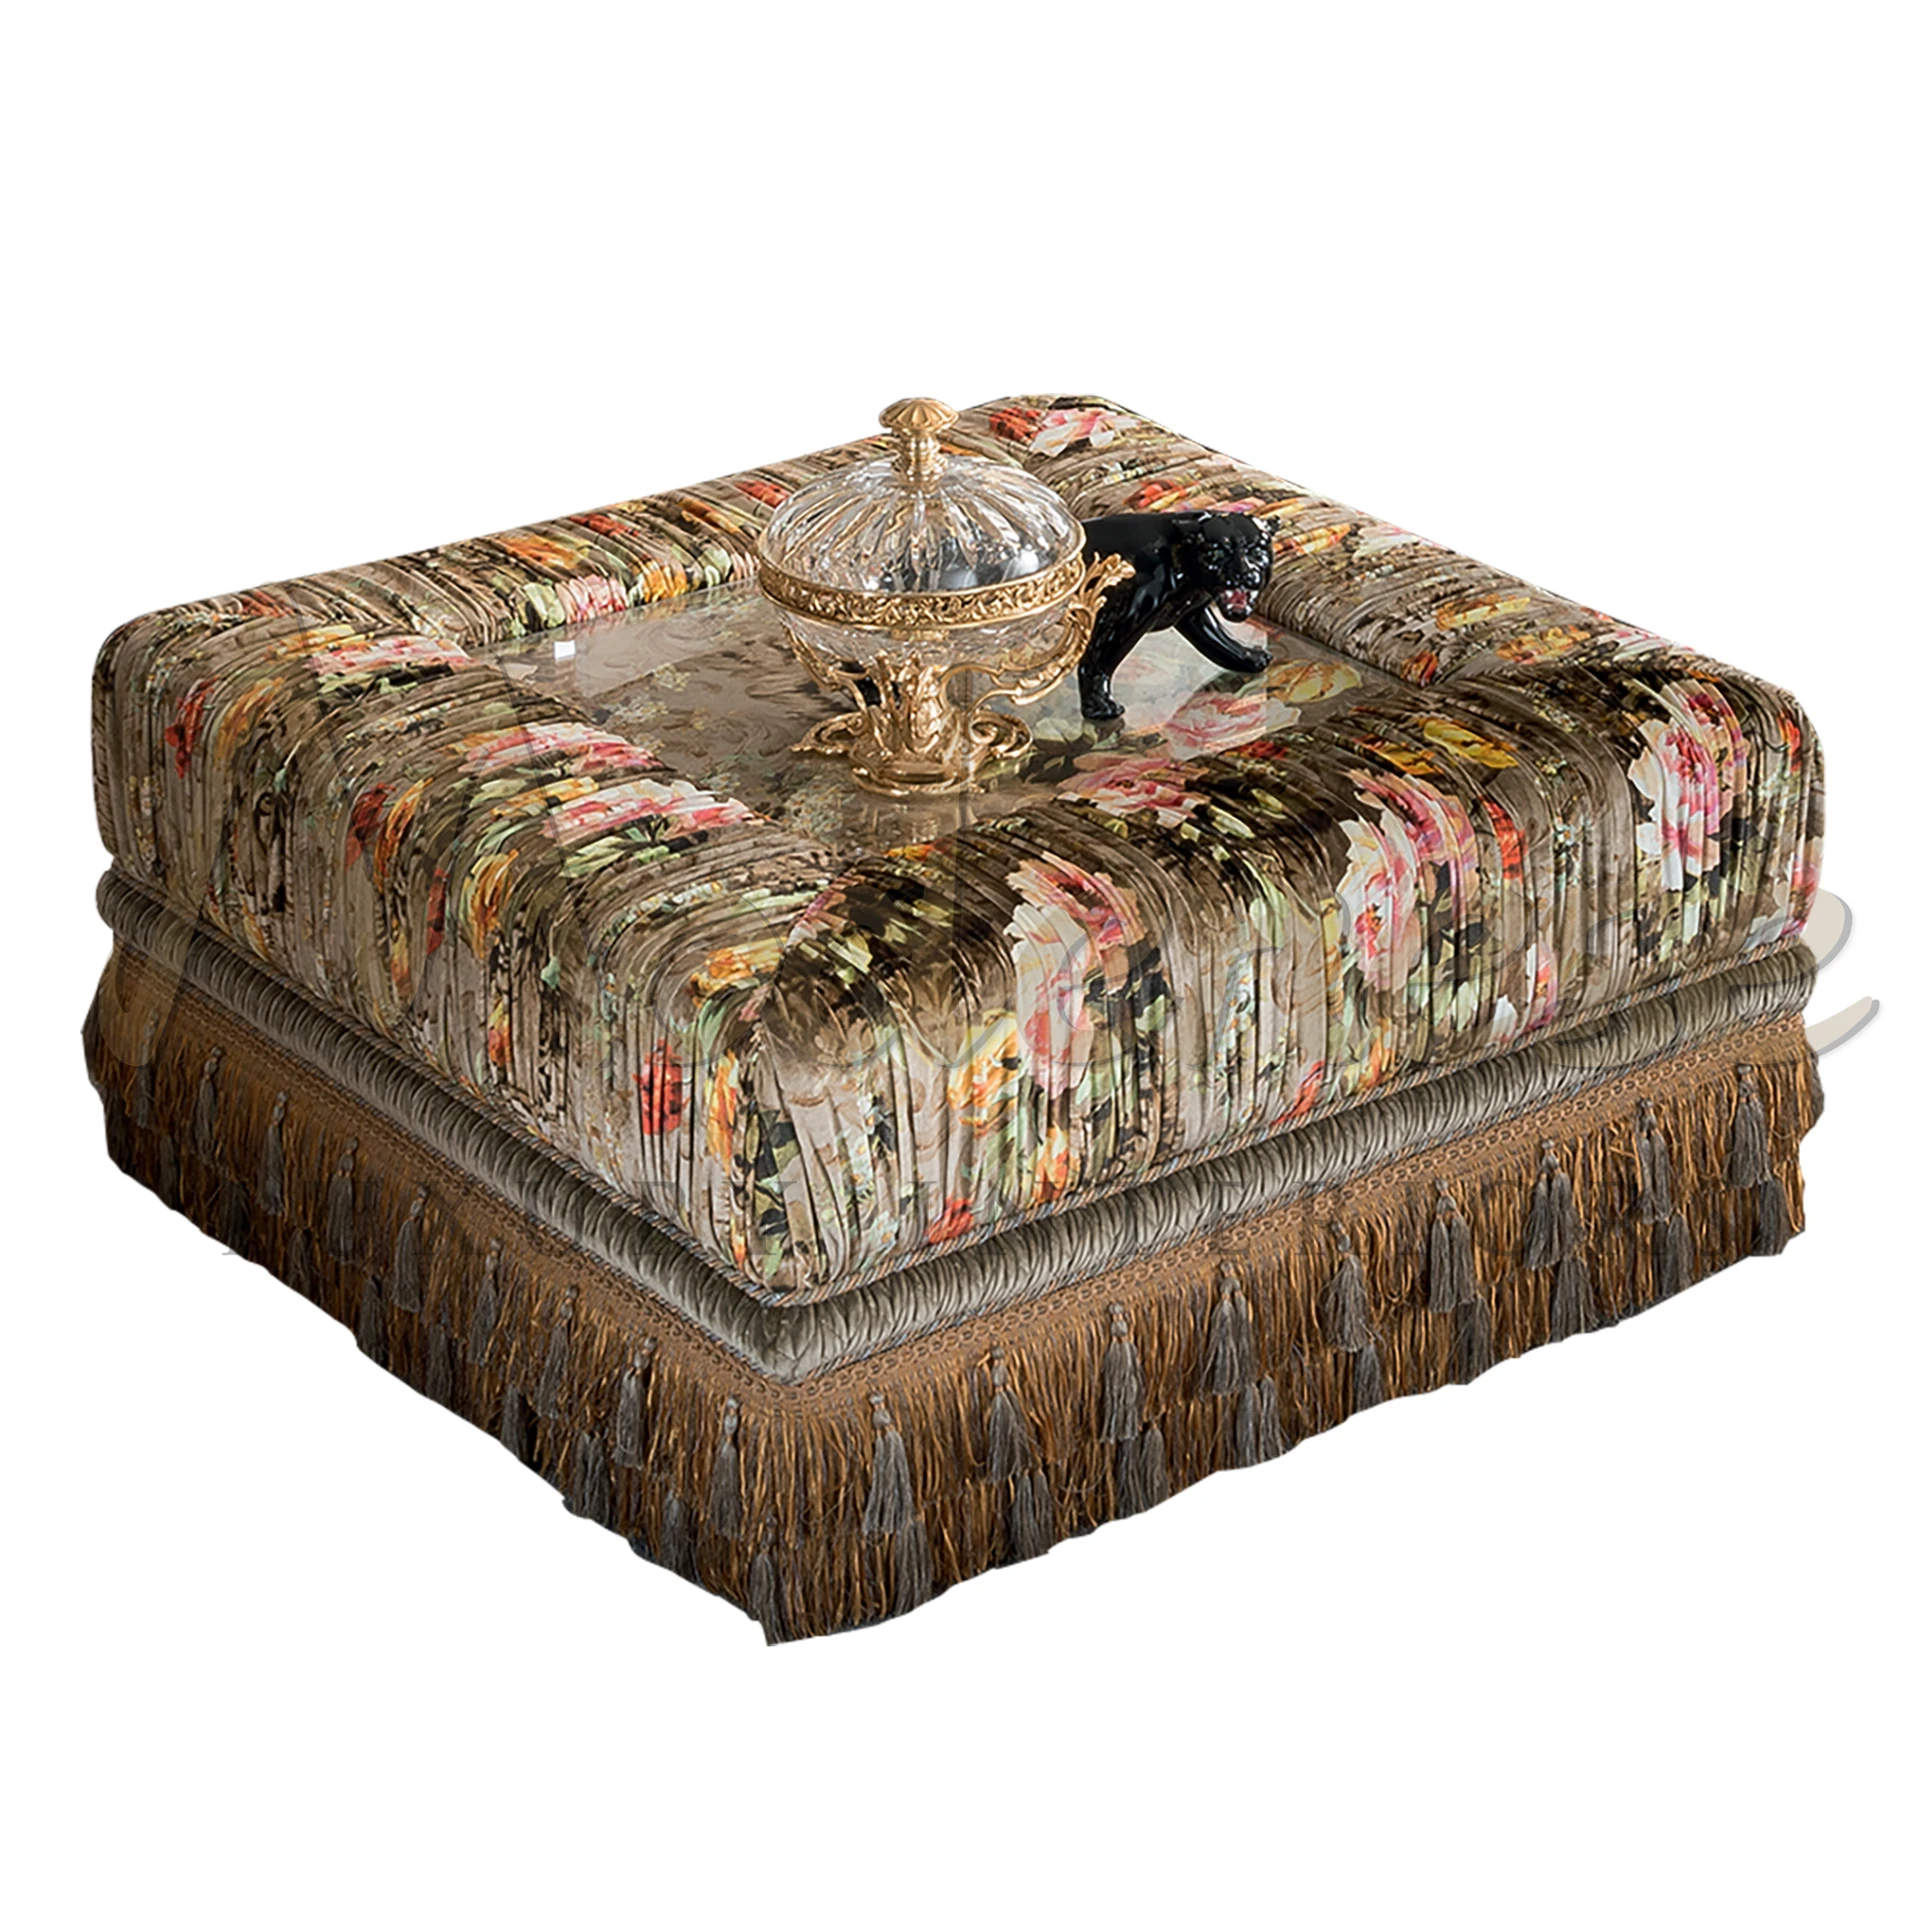 Vibrant Floral Upholstery Central Table by Modenese, blending traditional patterns with modern luxury for a dynamic interior.